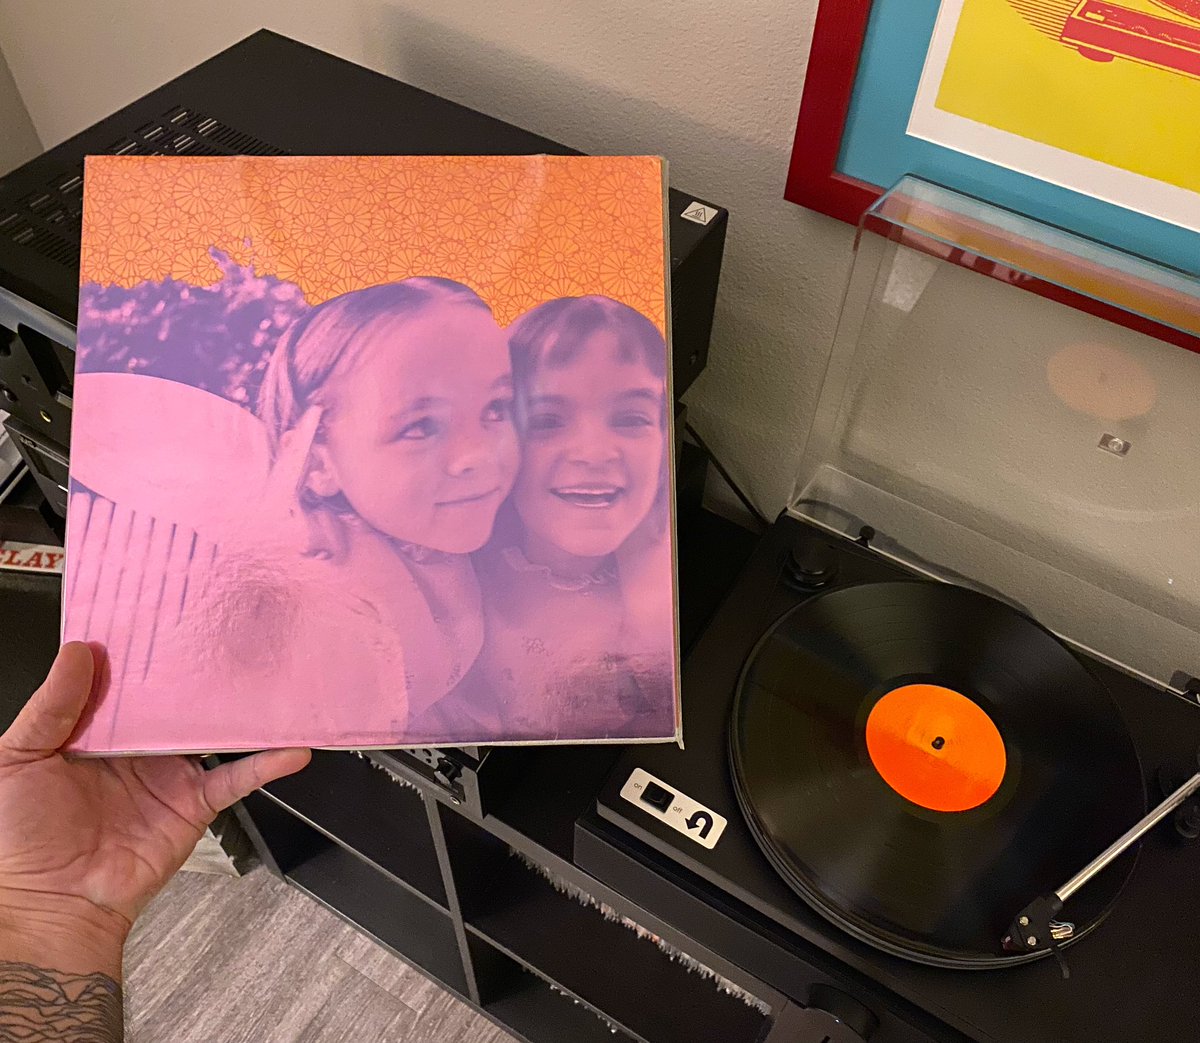 July 27, 1993 Happy 30th birthday to Siamese Dream, the second album by The Smashing Pumpkins. “Freak out and give in Doesn't matter what you believe in” It’s still a phenomenal album three decades later. #vinyl #siamesedream30 #thesmashingpumpkins